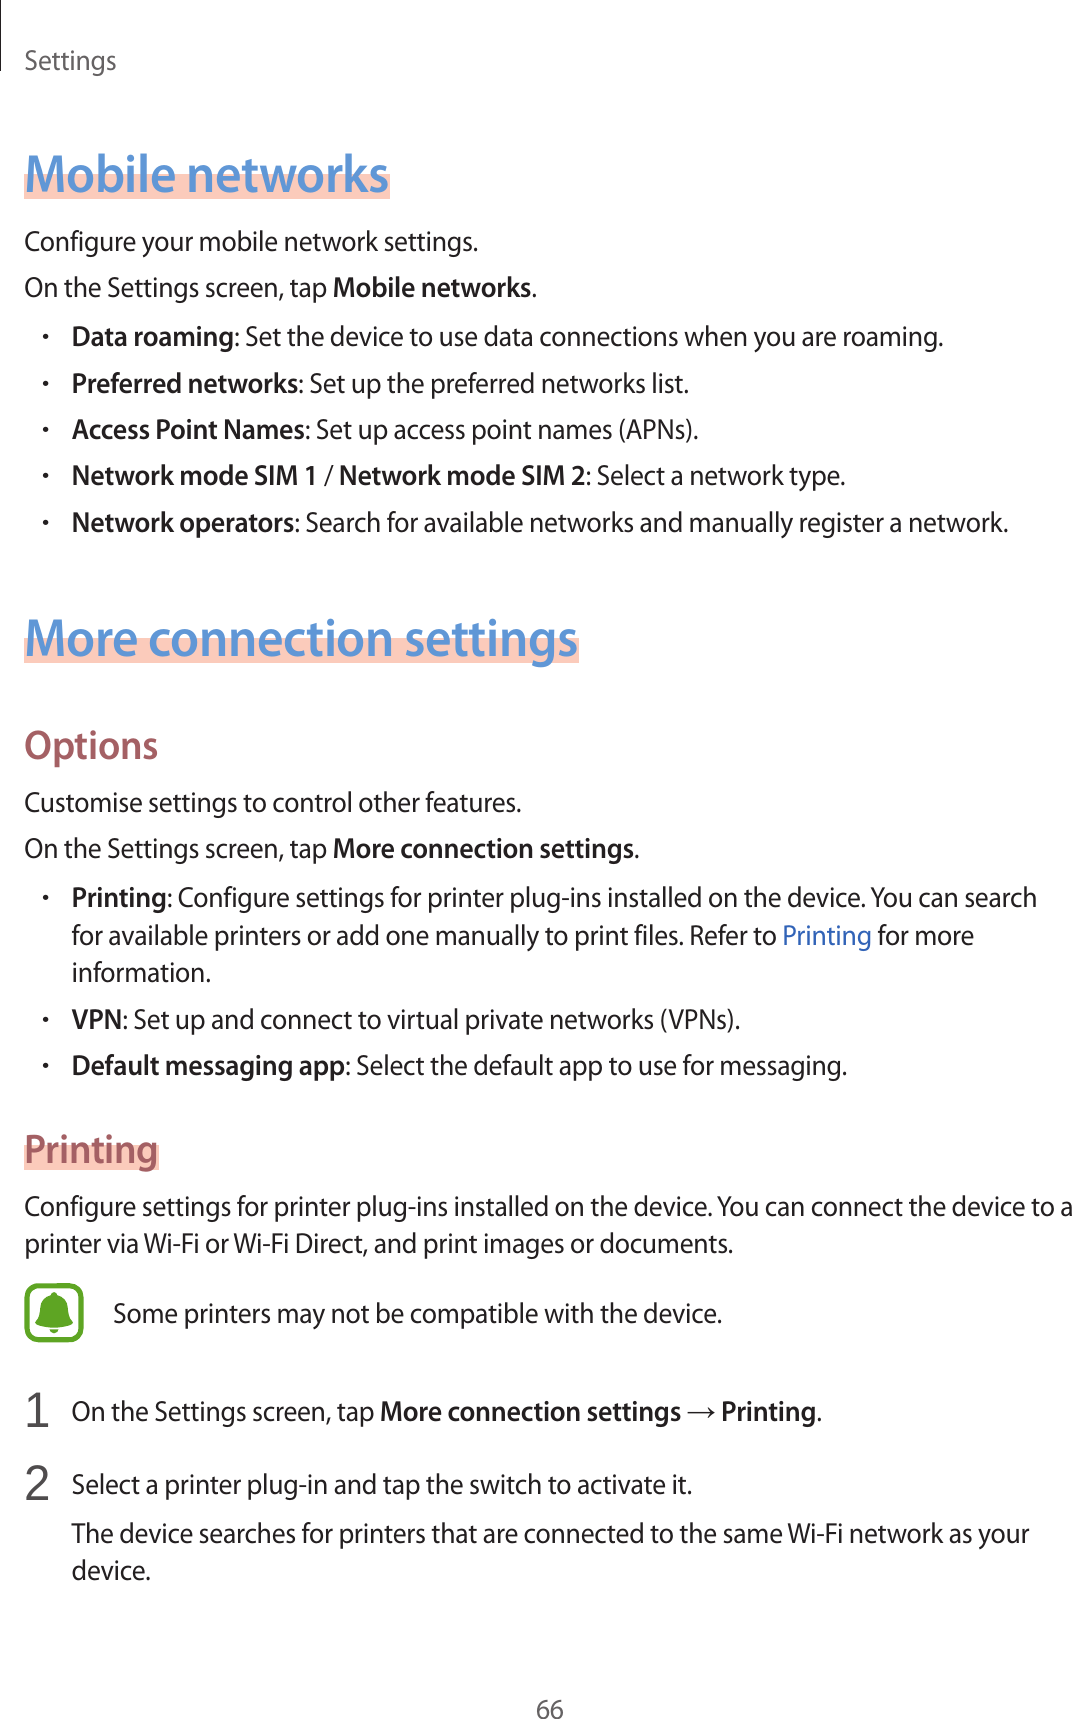 Settings66Mobile networksConfigure your mobile network settings.On the Settings screen, tap Mobile networks.•Data roaming: Set the device to use data connections when you are roaming.•Preferred networks: Set up the preferred networks list.•Access Point Names: Set up access point names (APNs).•Network mode SIM 1 / Network mode SIM 2: Select a network type.•Network operators: Search for available networks and manually register a network.More connection settingsOptionsCustomise settings to control other features.On the Settings screen, tap More connection settings.•Printing: Configure settings for printer plug-ins installed on the device. You can search for available printers or add one manually to print files. Refer to Printing for more information.•VPN: Set up and connect to virtual private networks (VPNs).•Default messaging app: Select the default app to use for messaging.PrintingConfigure settings for printer plug-ins installed on the device. You can connect the device to a printer via Wi-Fi or Wi-Fi Direct, and print images or documents.Some printers may not be compatible with the device.1  On the Settings screen, tap More connection settings → Printing.2  Select a printer plug-in and tap the switch to activate it.The device searches for printers that are connected to the same Wi-Fi network as your device.